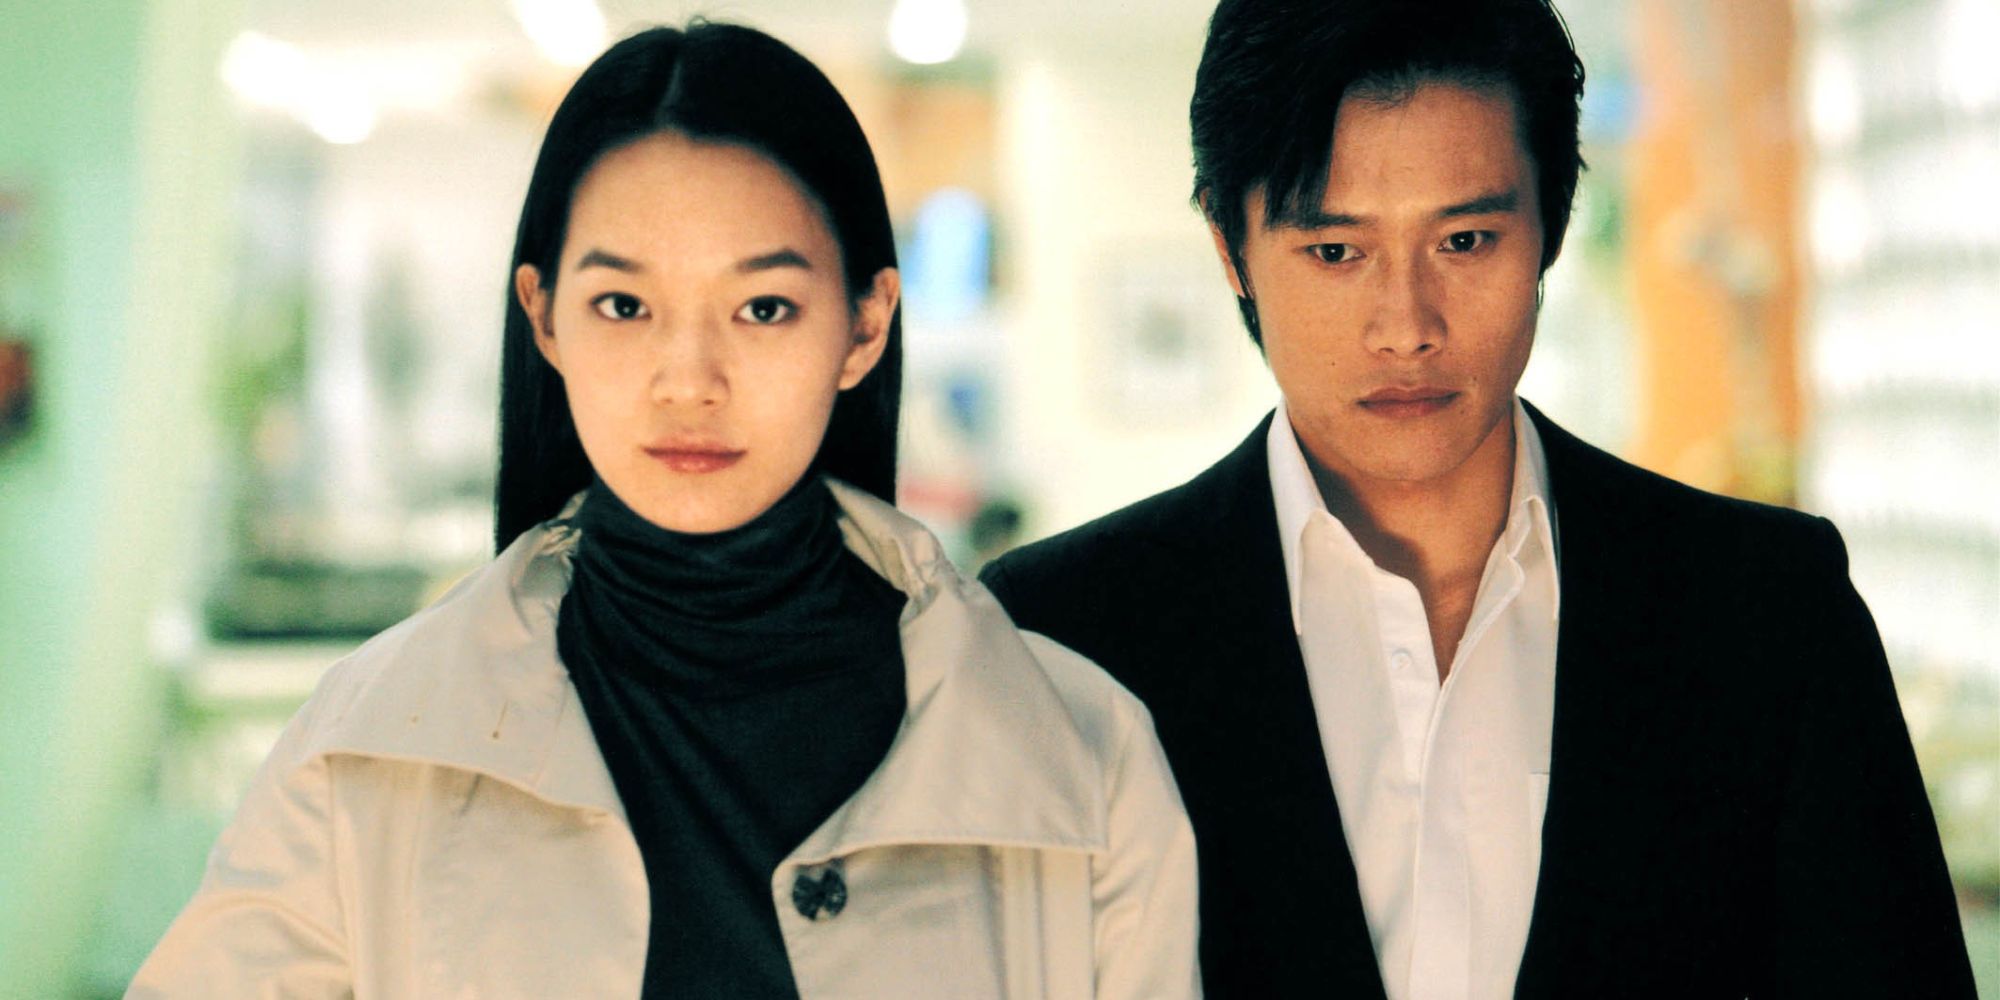 Shin Min-a and Lee Byung-hun in 'A Bittersweet Life'